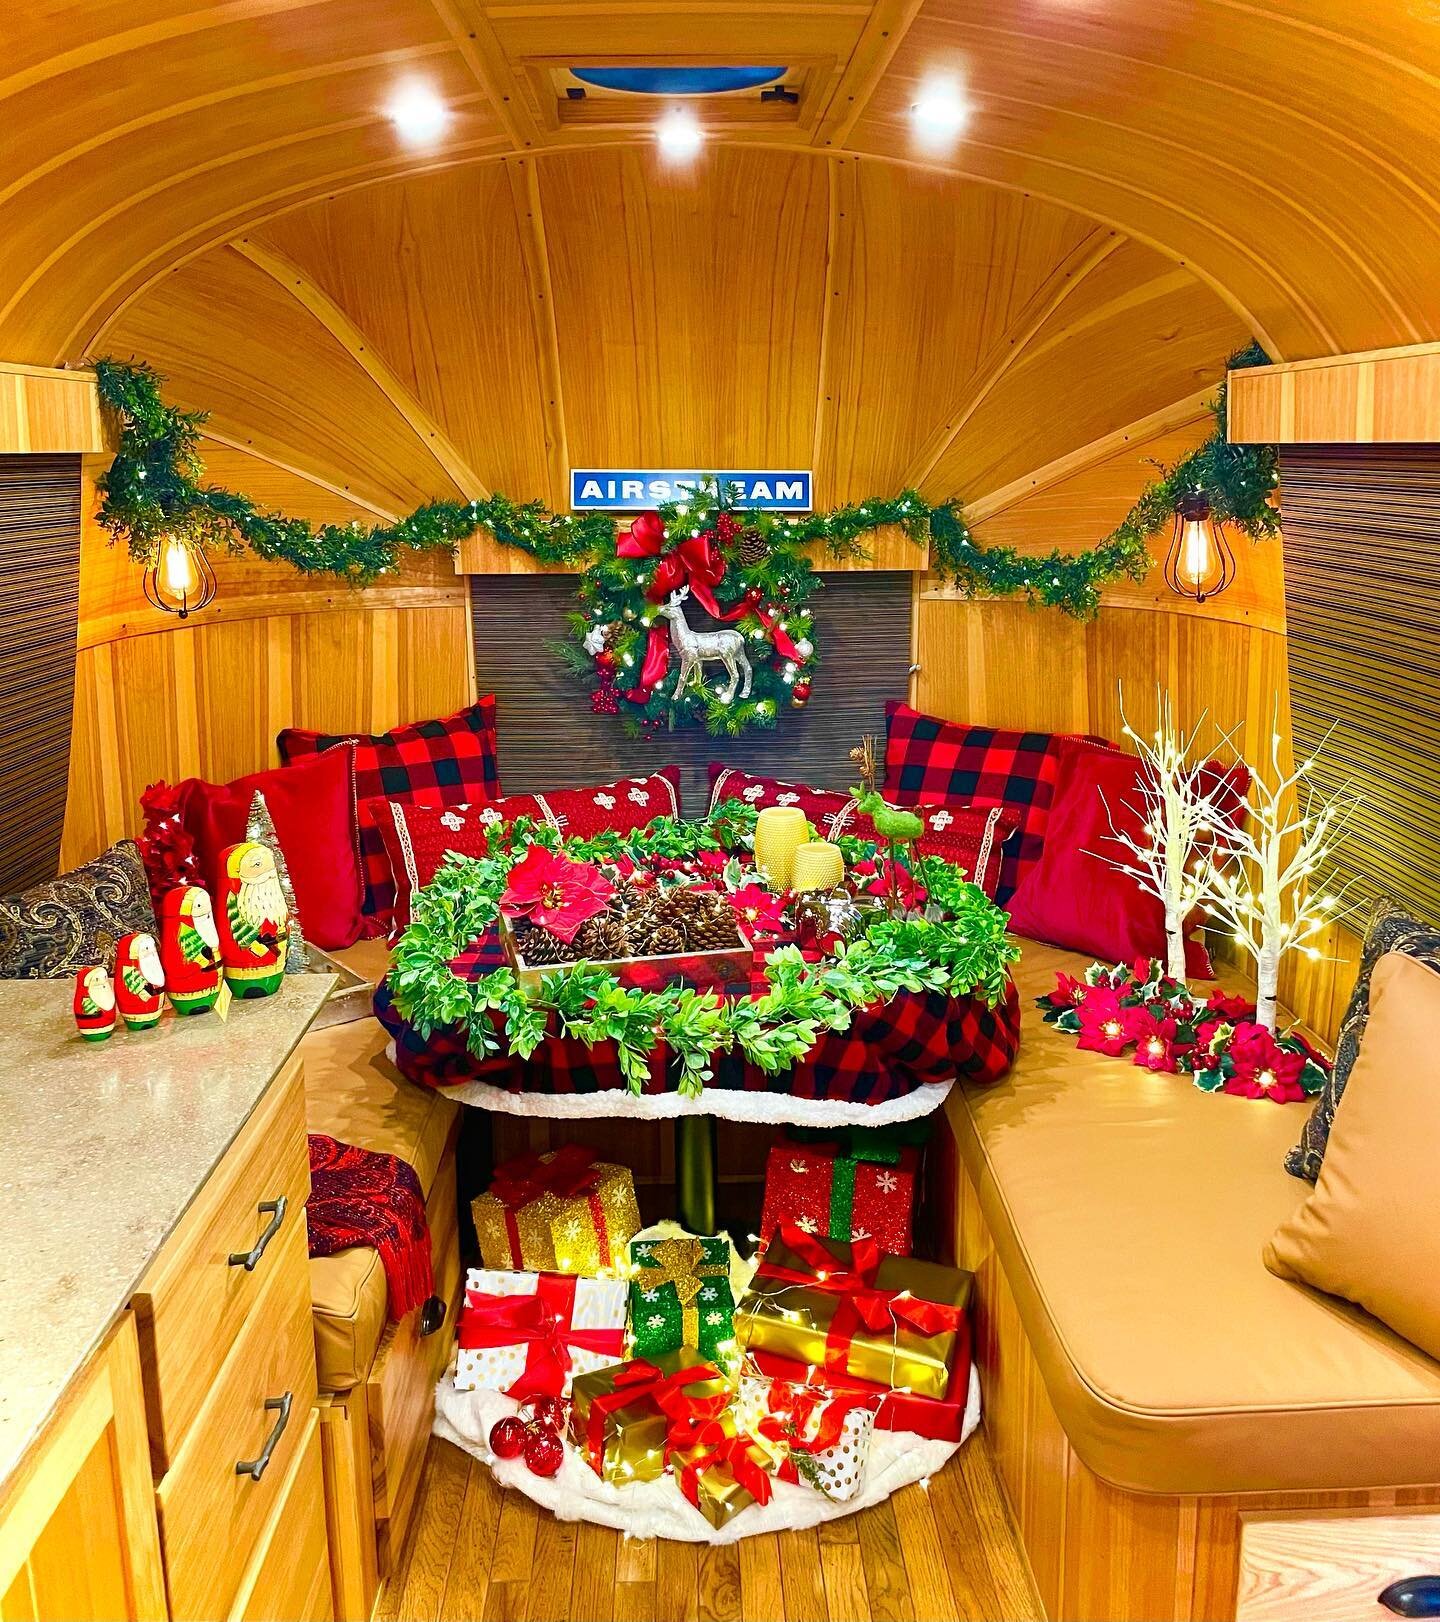 Happy Holidays from our Hickory Airstream to you!
.
.
.
.
.
.
.
.
#airstream #liveriveted #vintagetrailer #vintagecampertrailersmagazine